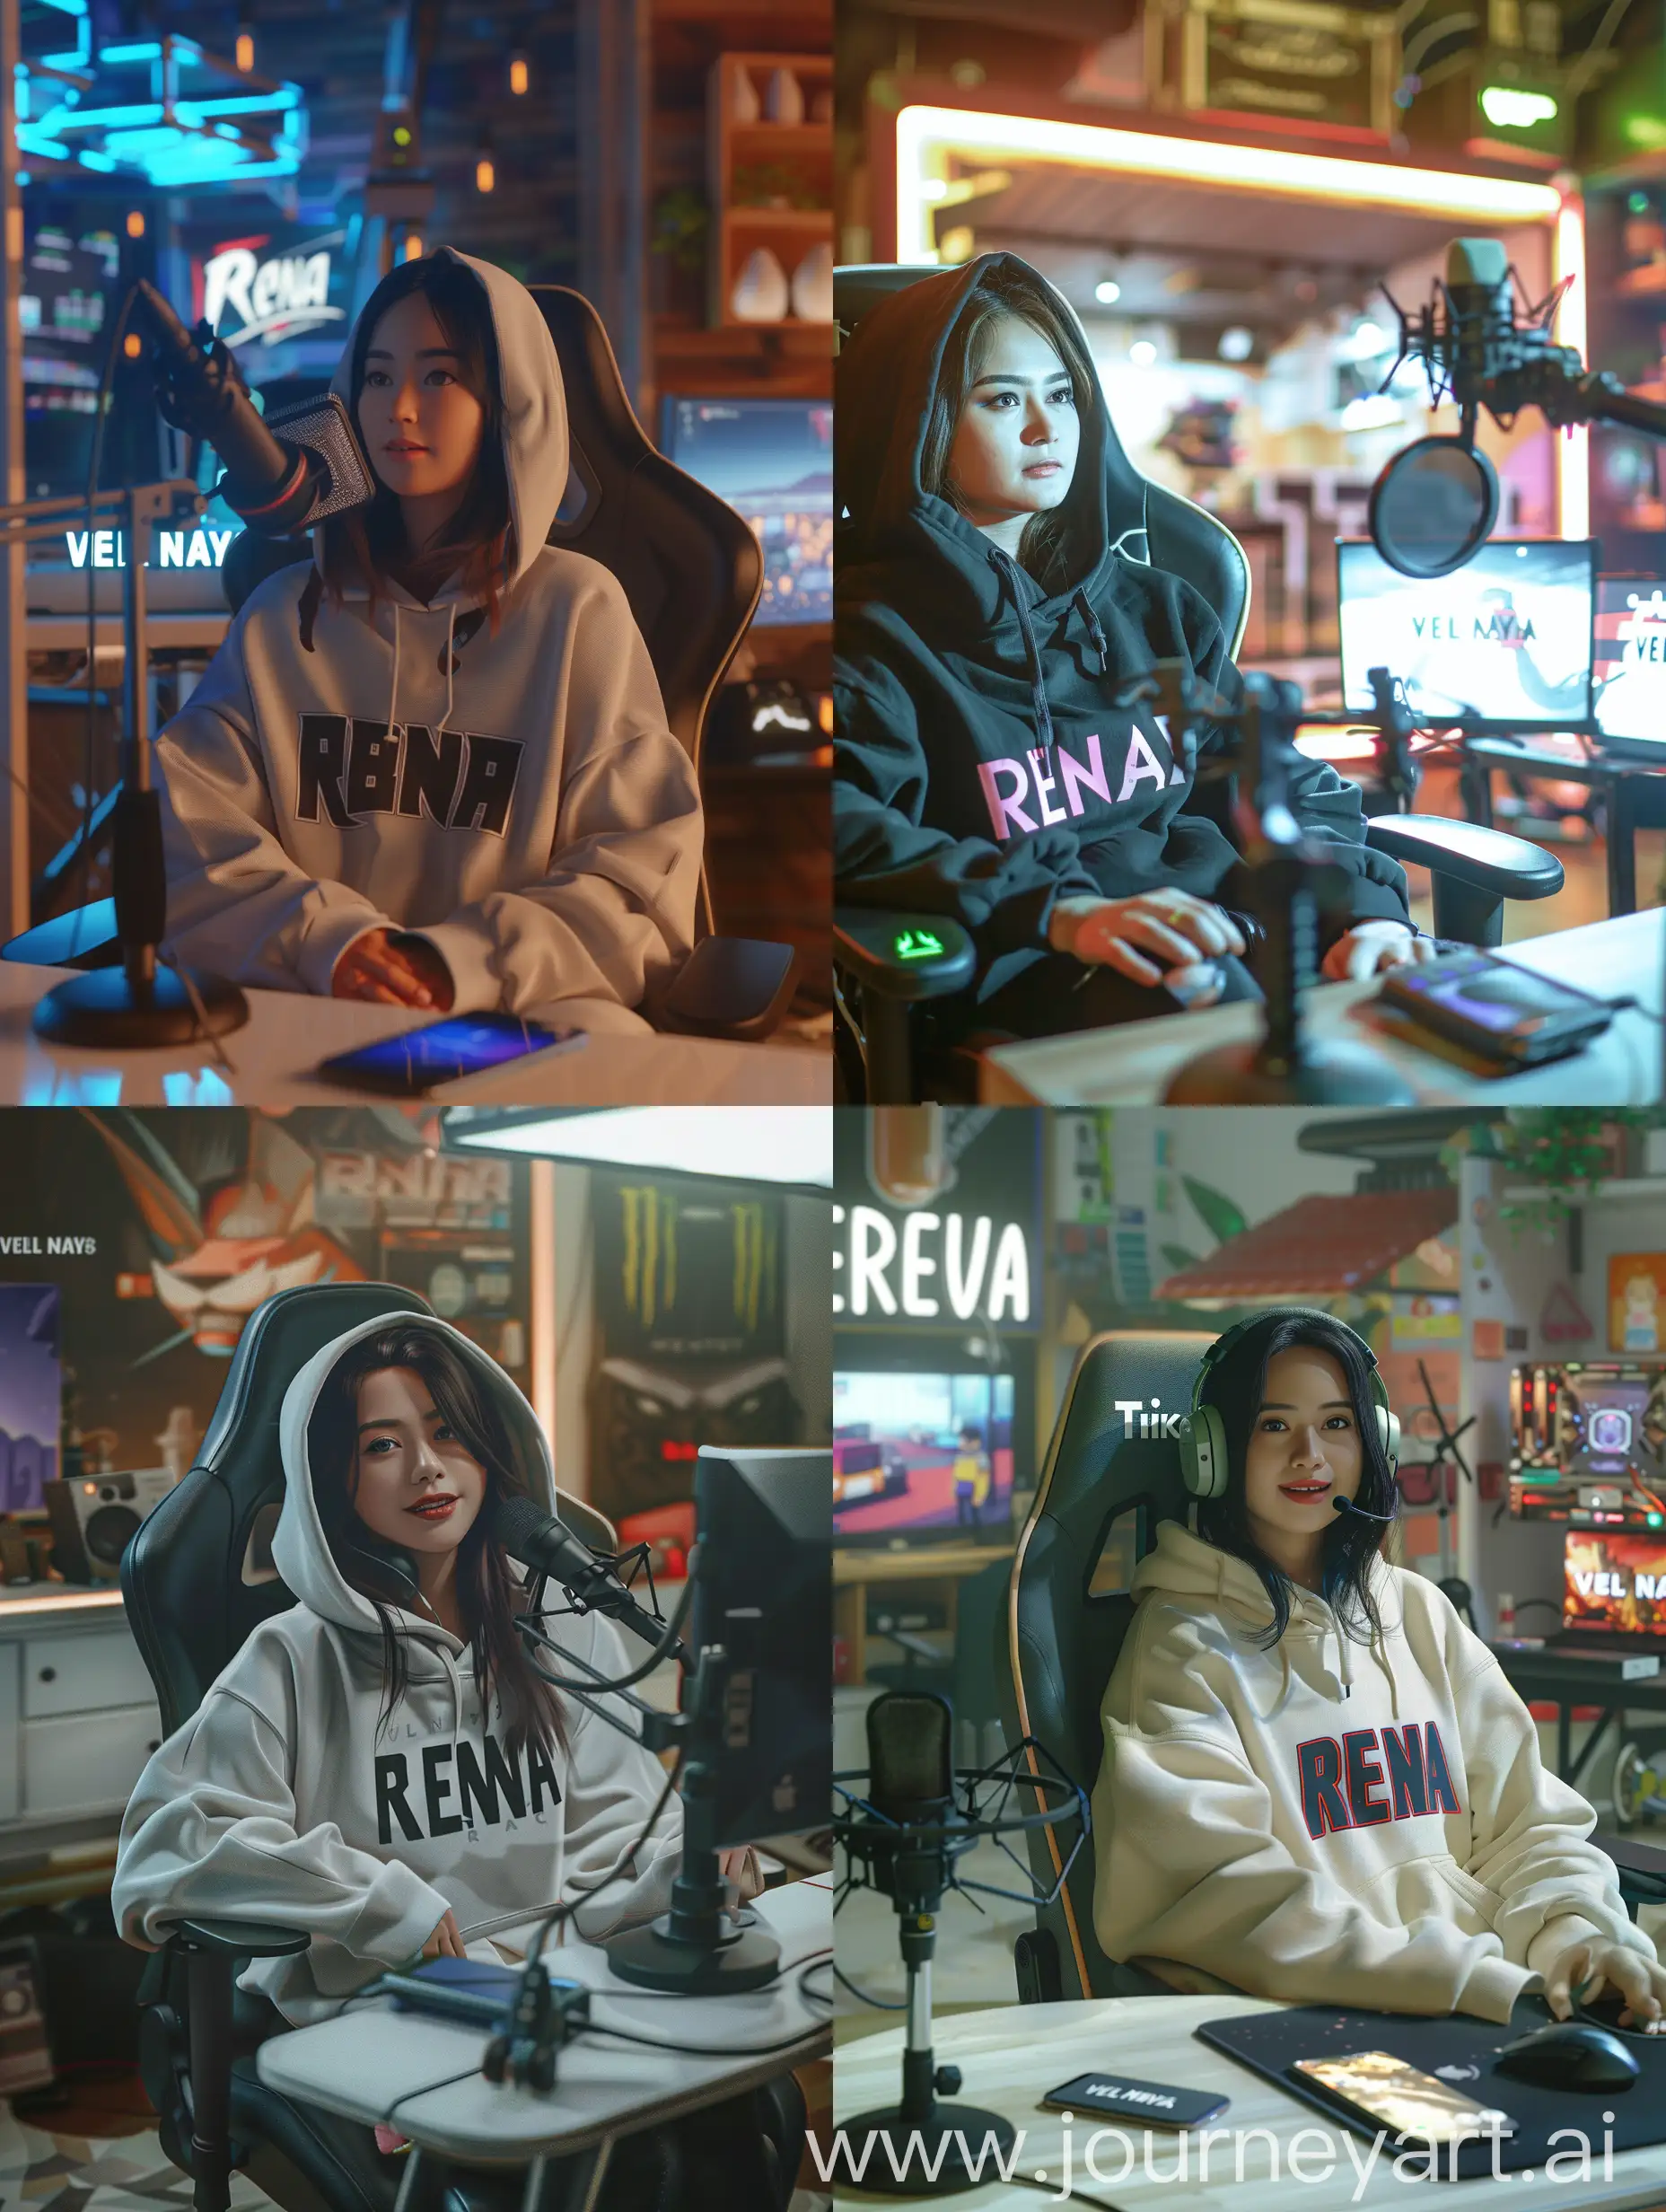 A 32-year-old Indonesian woman is making a podcast on the Tik Tok application, sitting in a gaming chair wearing a 'RENA' hoodie. In front of him is a microphone and an Apple phone on a table, with a realistic HD background of a room with the words 'VEL NAYS' written on it.